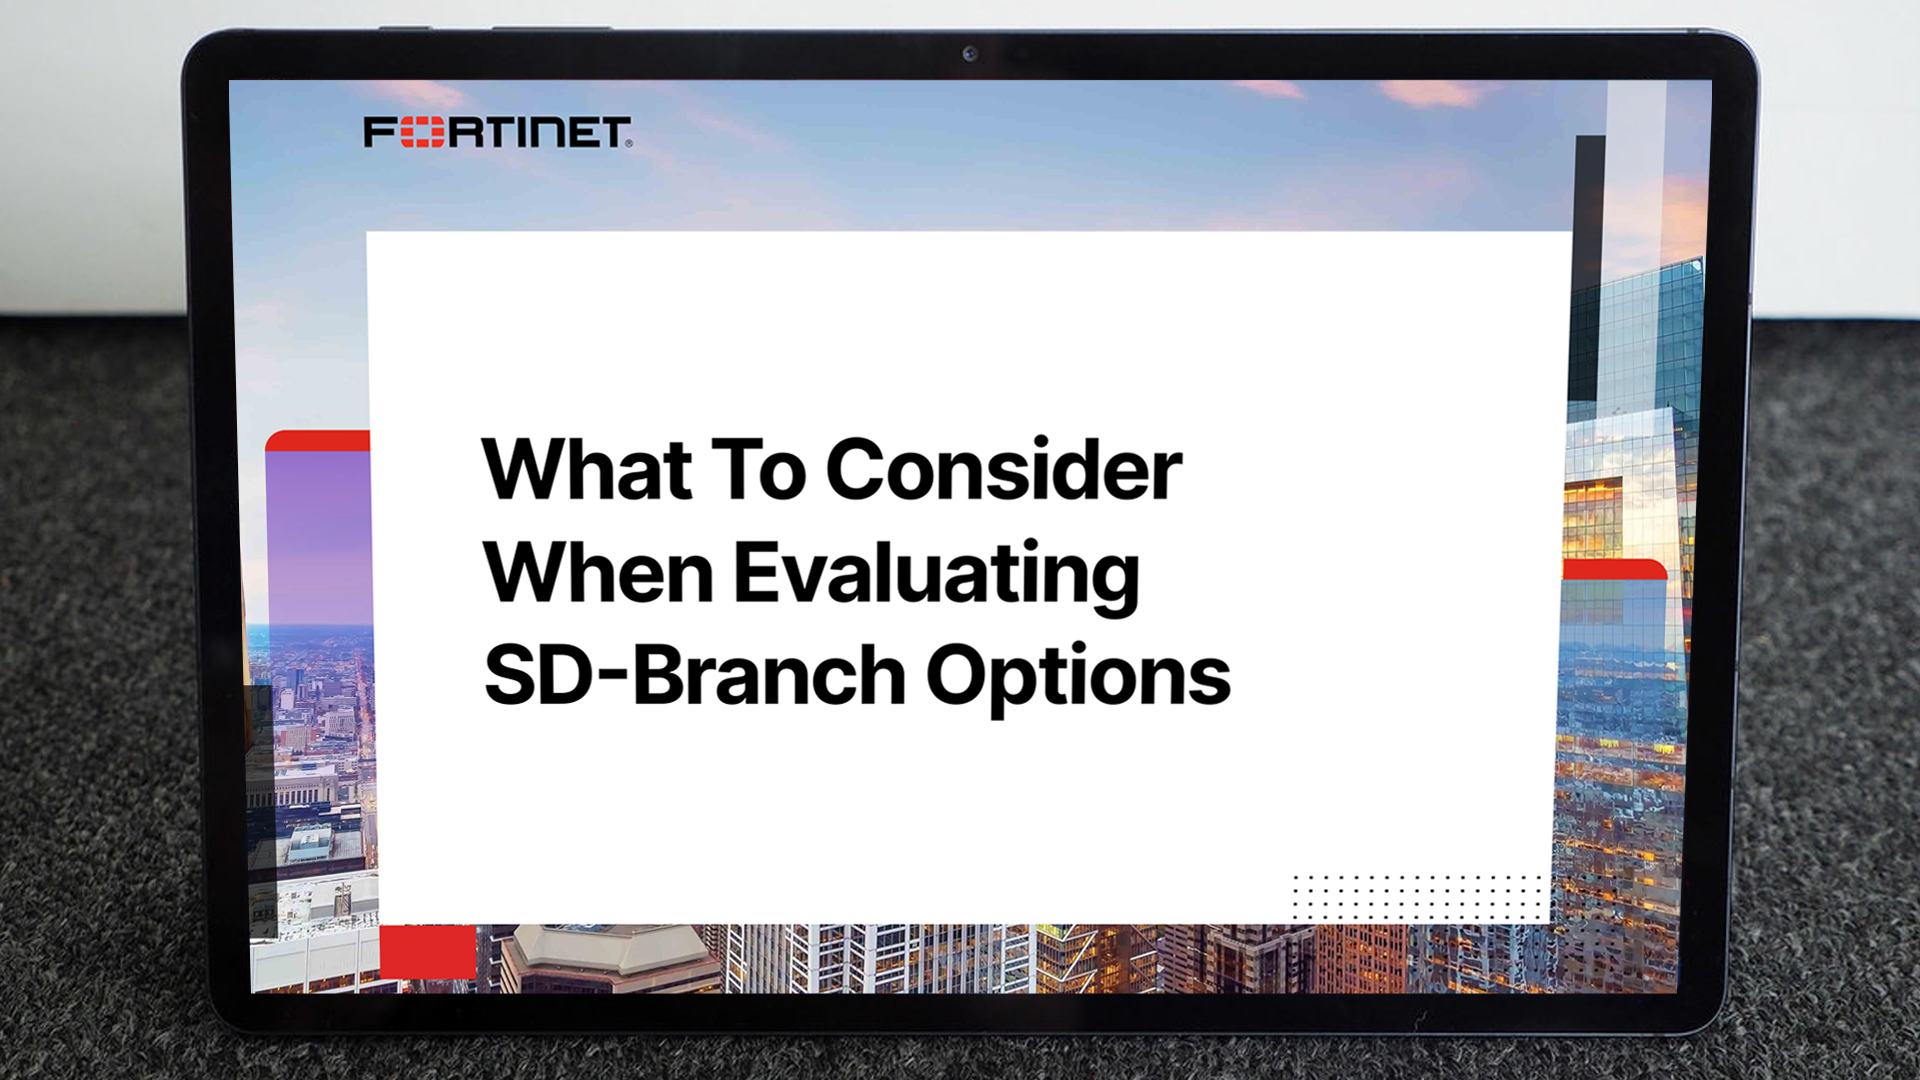 Whitepaper: Important considerations when evaluating SD-branch options